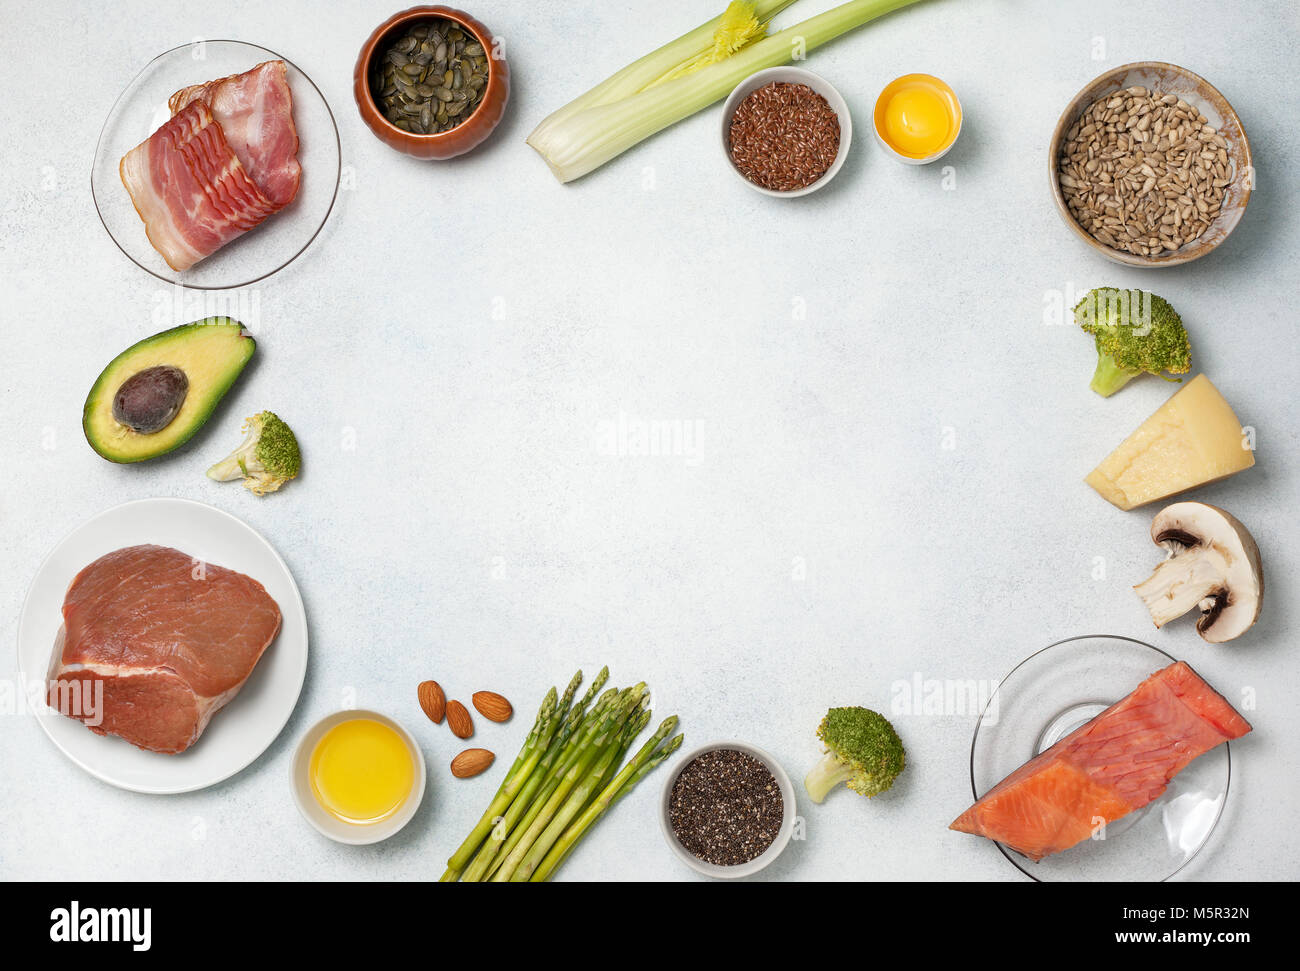 Ingredients for ketogenic diet: meat, bacon, fish, broccoli, asparagus, avocado, mushrooms, cheese, sunflower seeds, chia seeds, pumpkin seeds, flax s Stock Photo